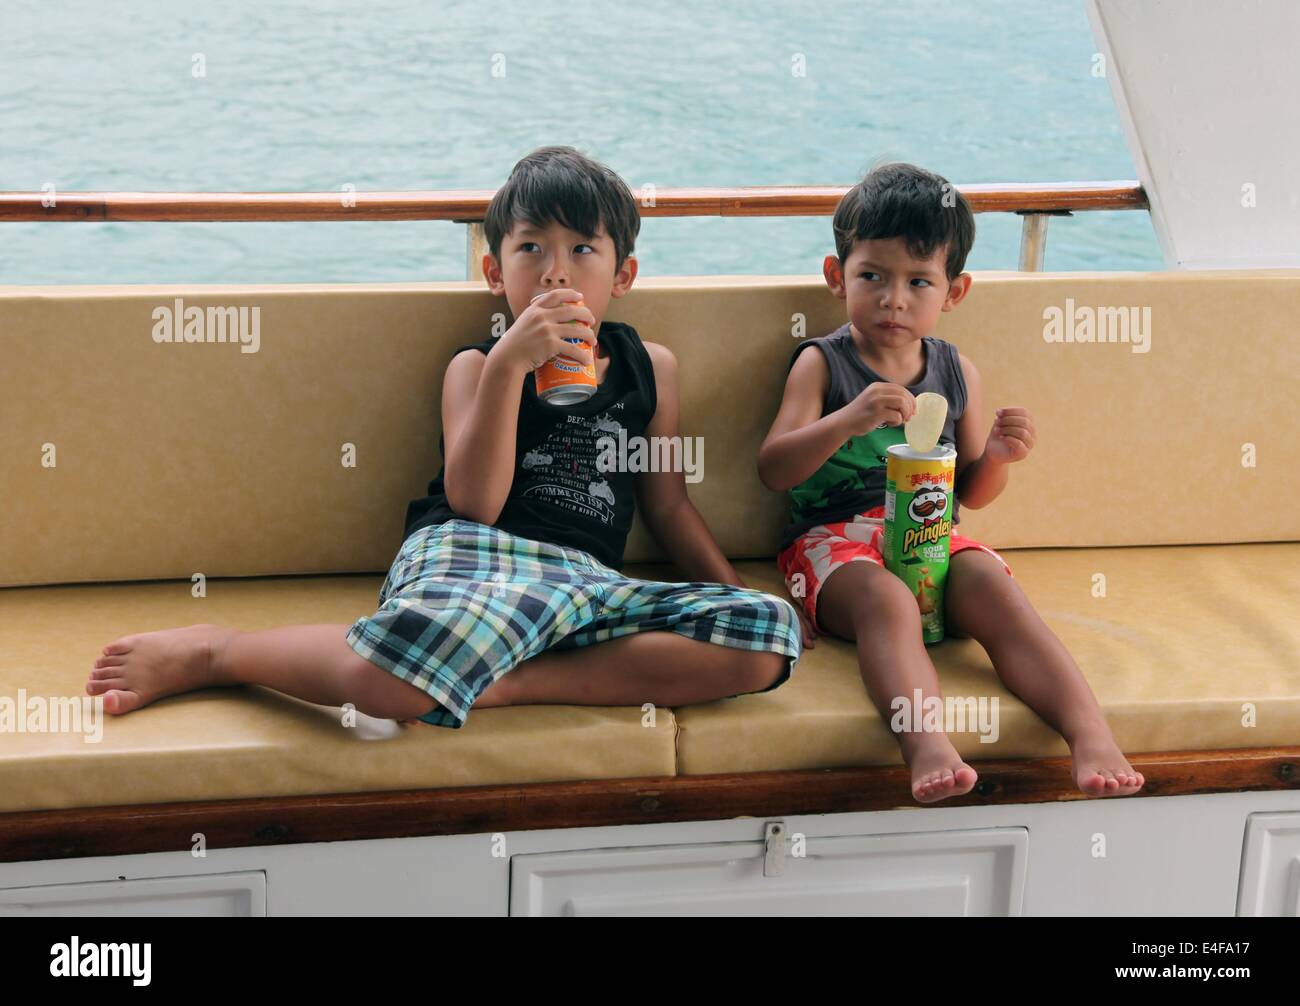 It's a photo of 2 child kid boys who sits on the deck of a boat or ship and eat and drink junk food like soda and chips Stock Photo